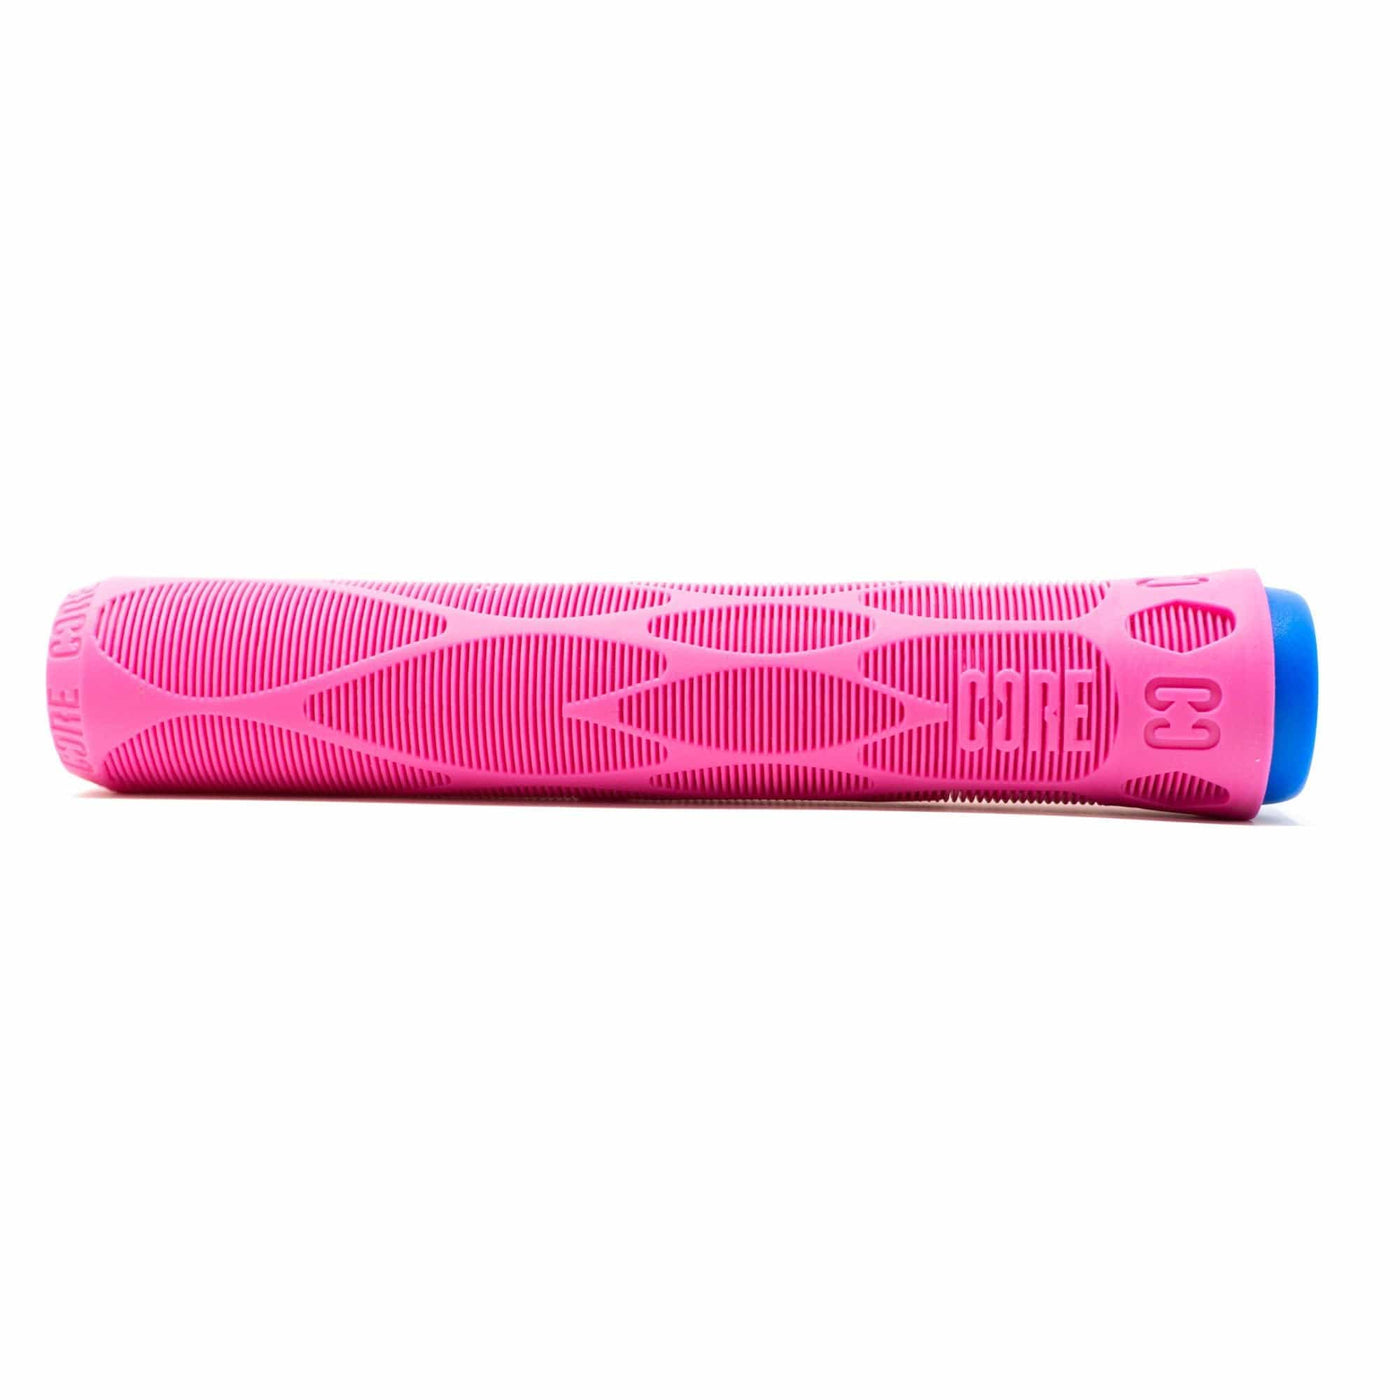 CORE Pro Scooter Handlebar Grips Soft 170mm Pink I Scooter Grips Single